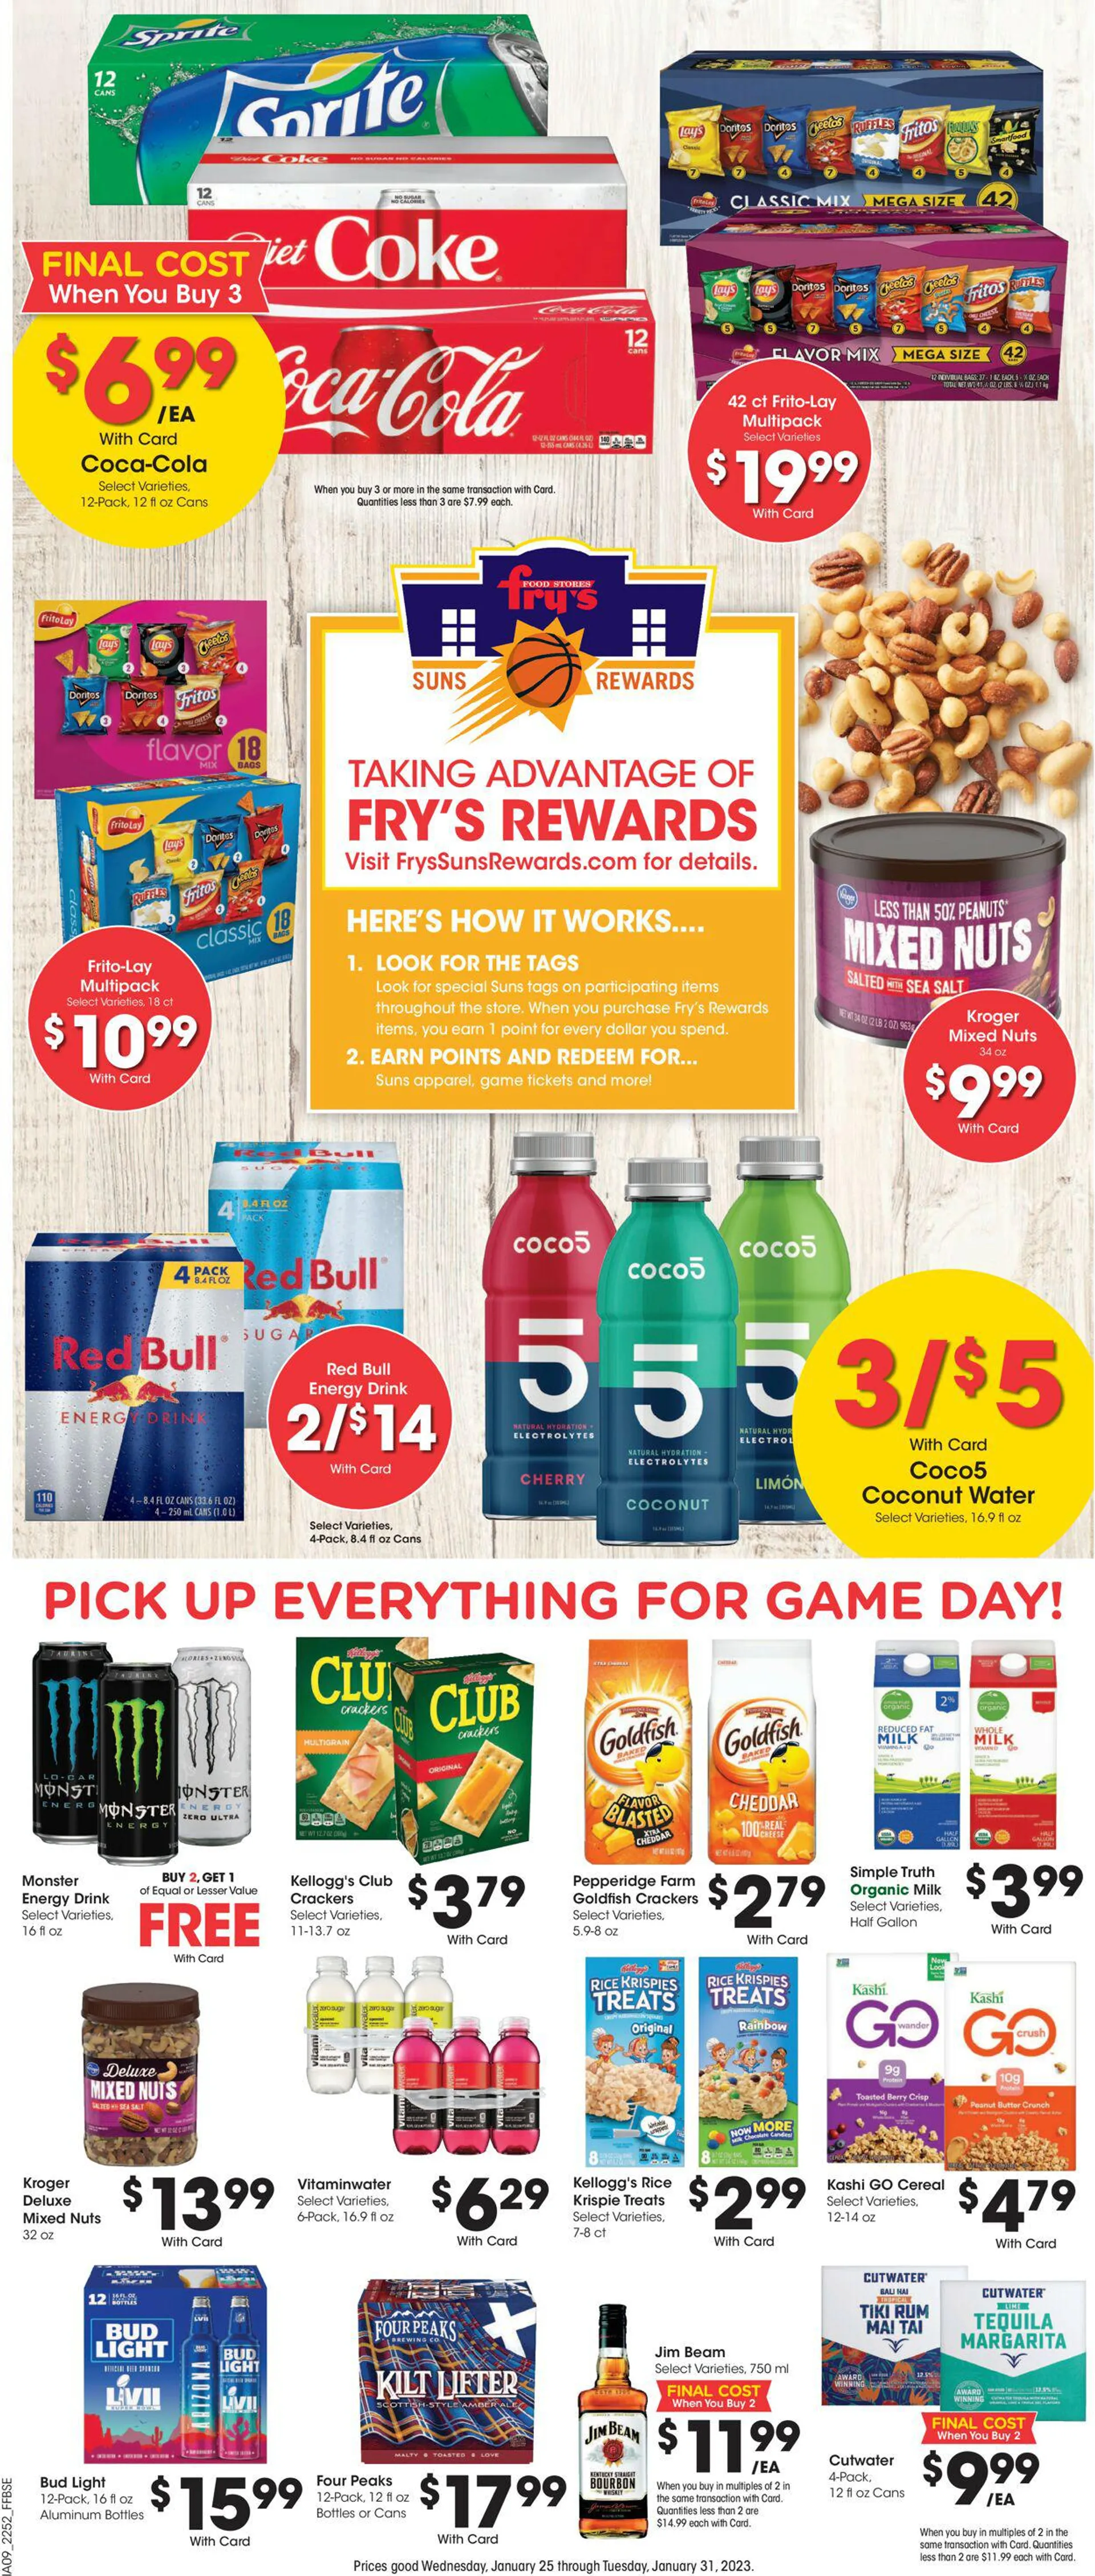 Fry’s Current weekly ad - 16